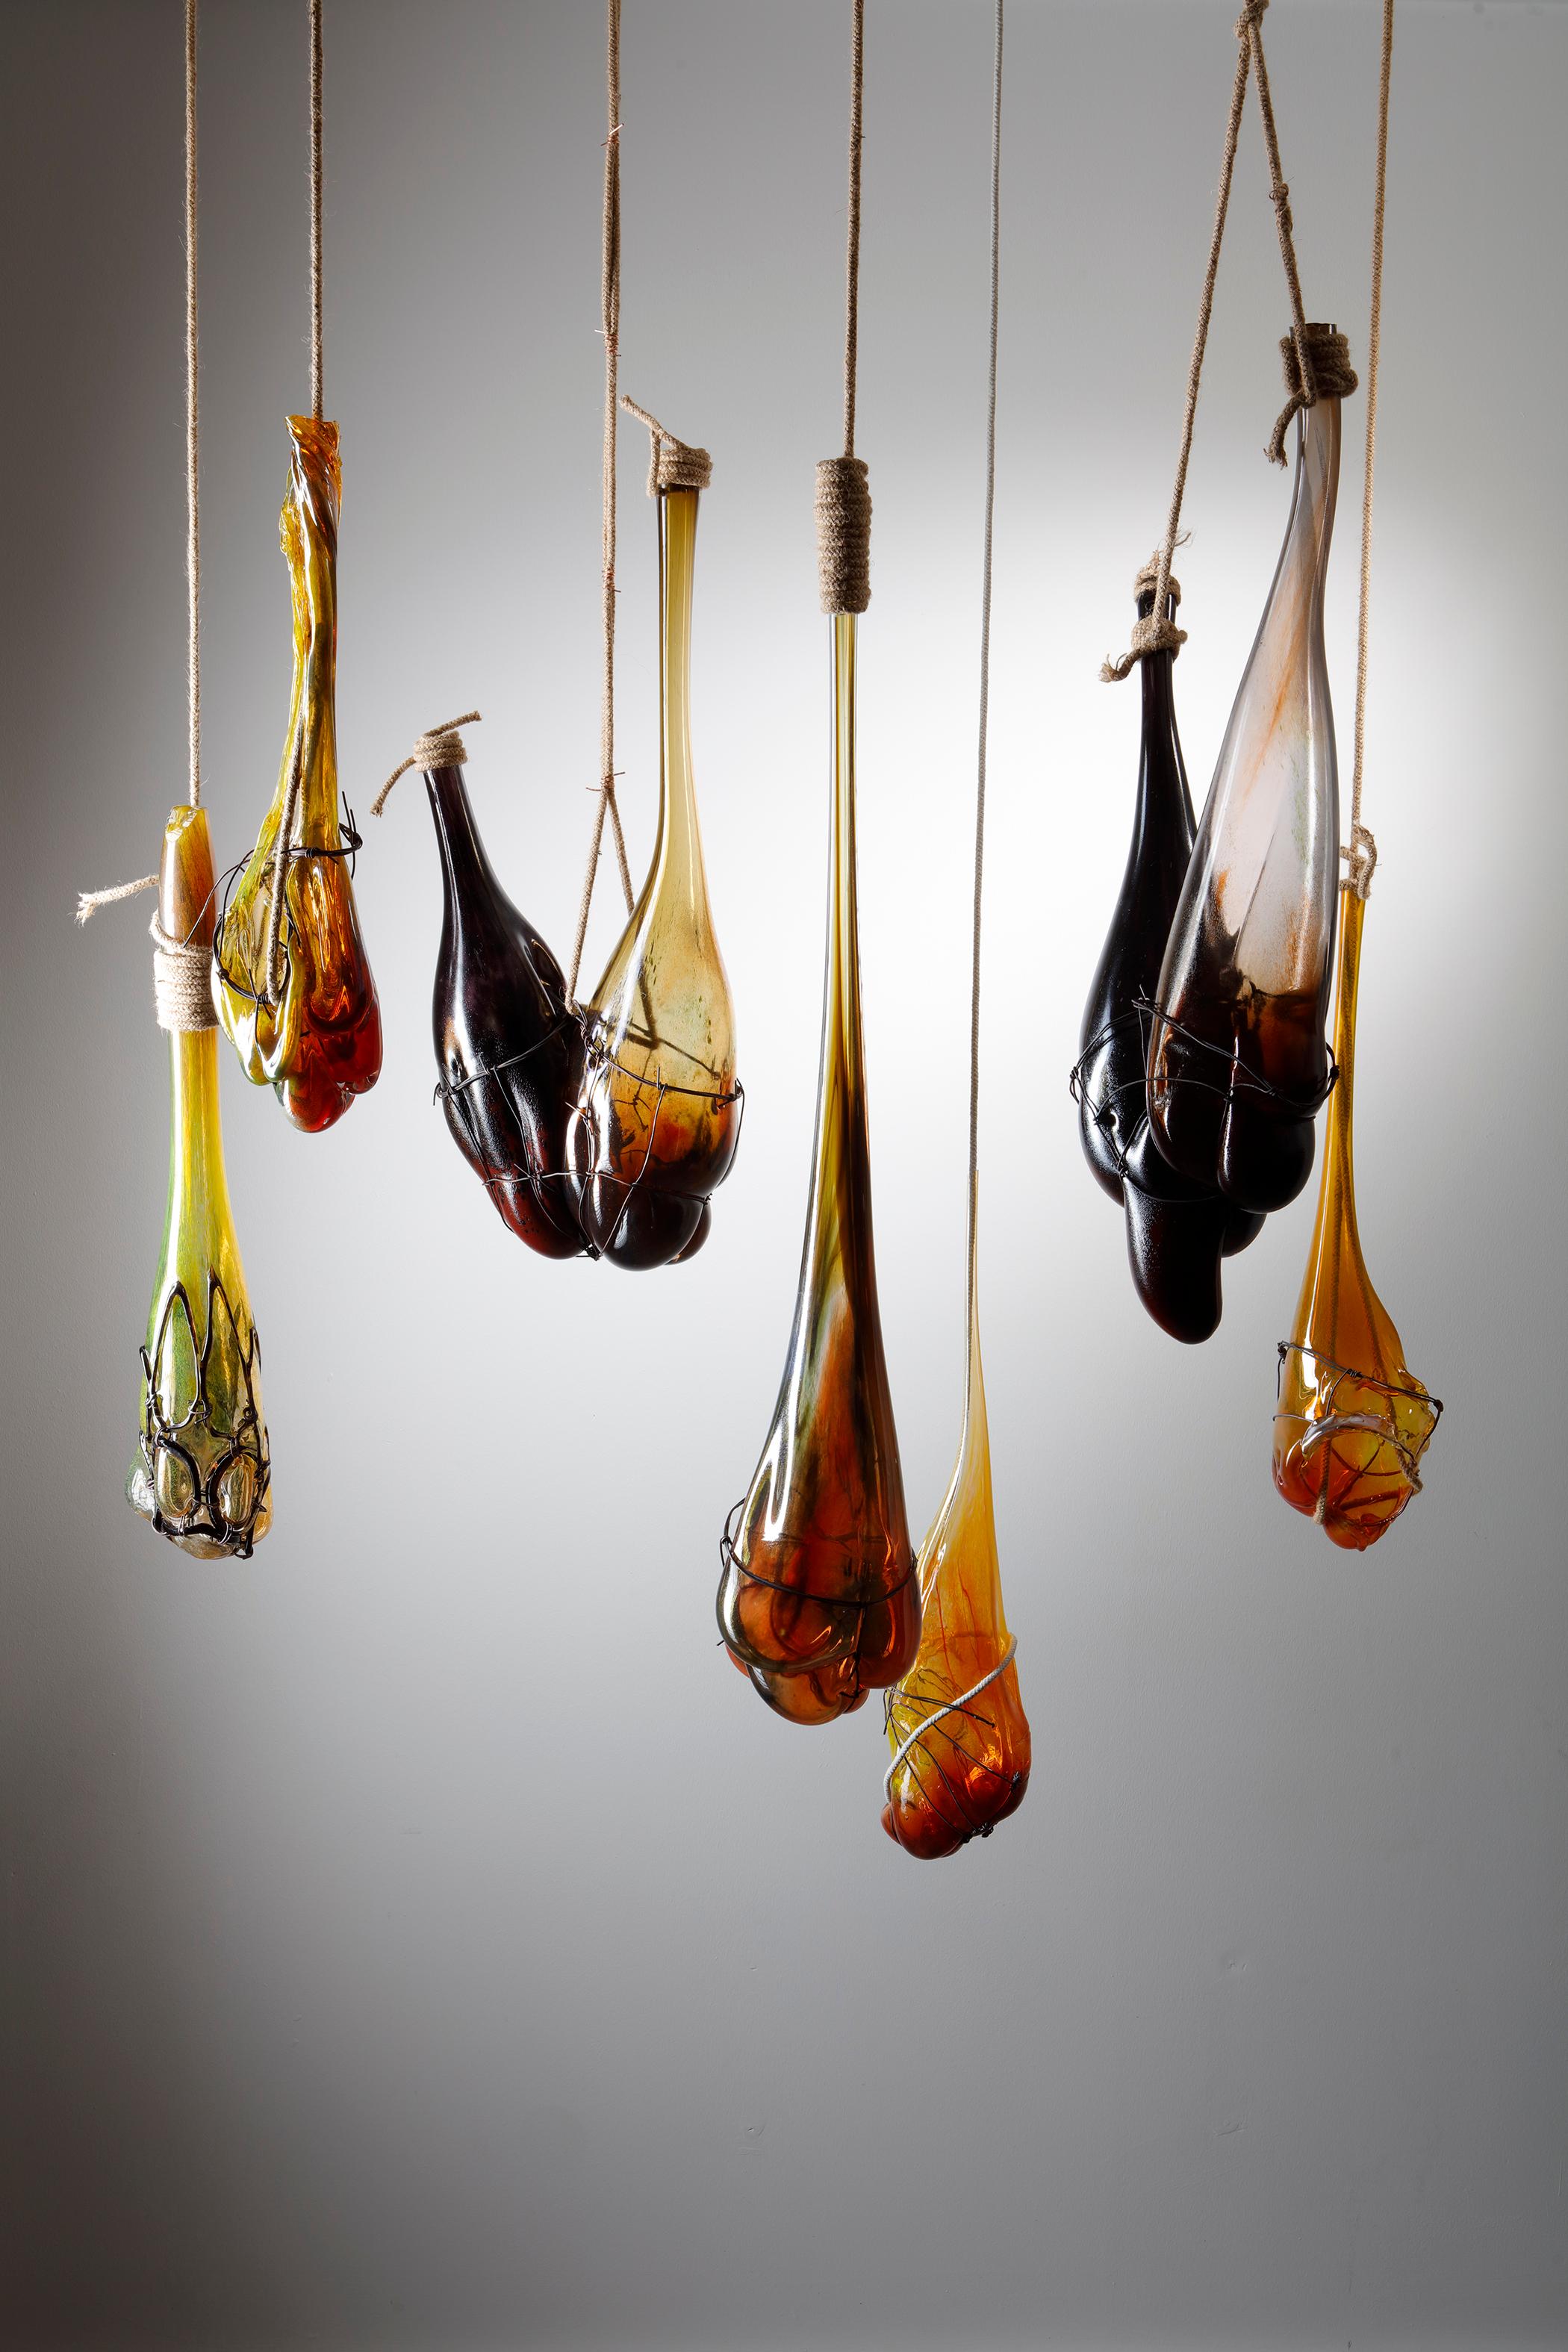 Organic Modern Strange Fruit Installation, a Unique Glass Hanging Sculpture by Chris Day For Sale